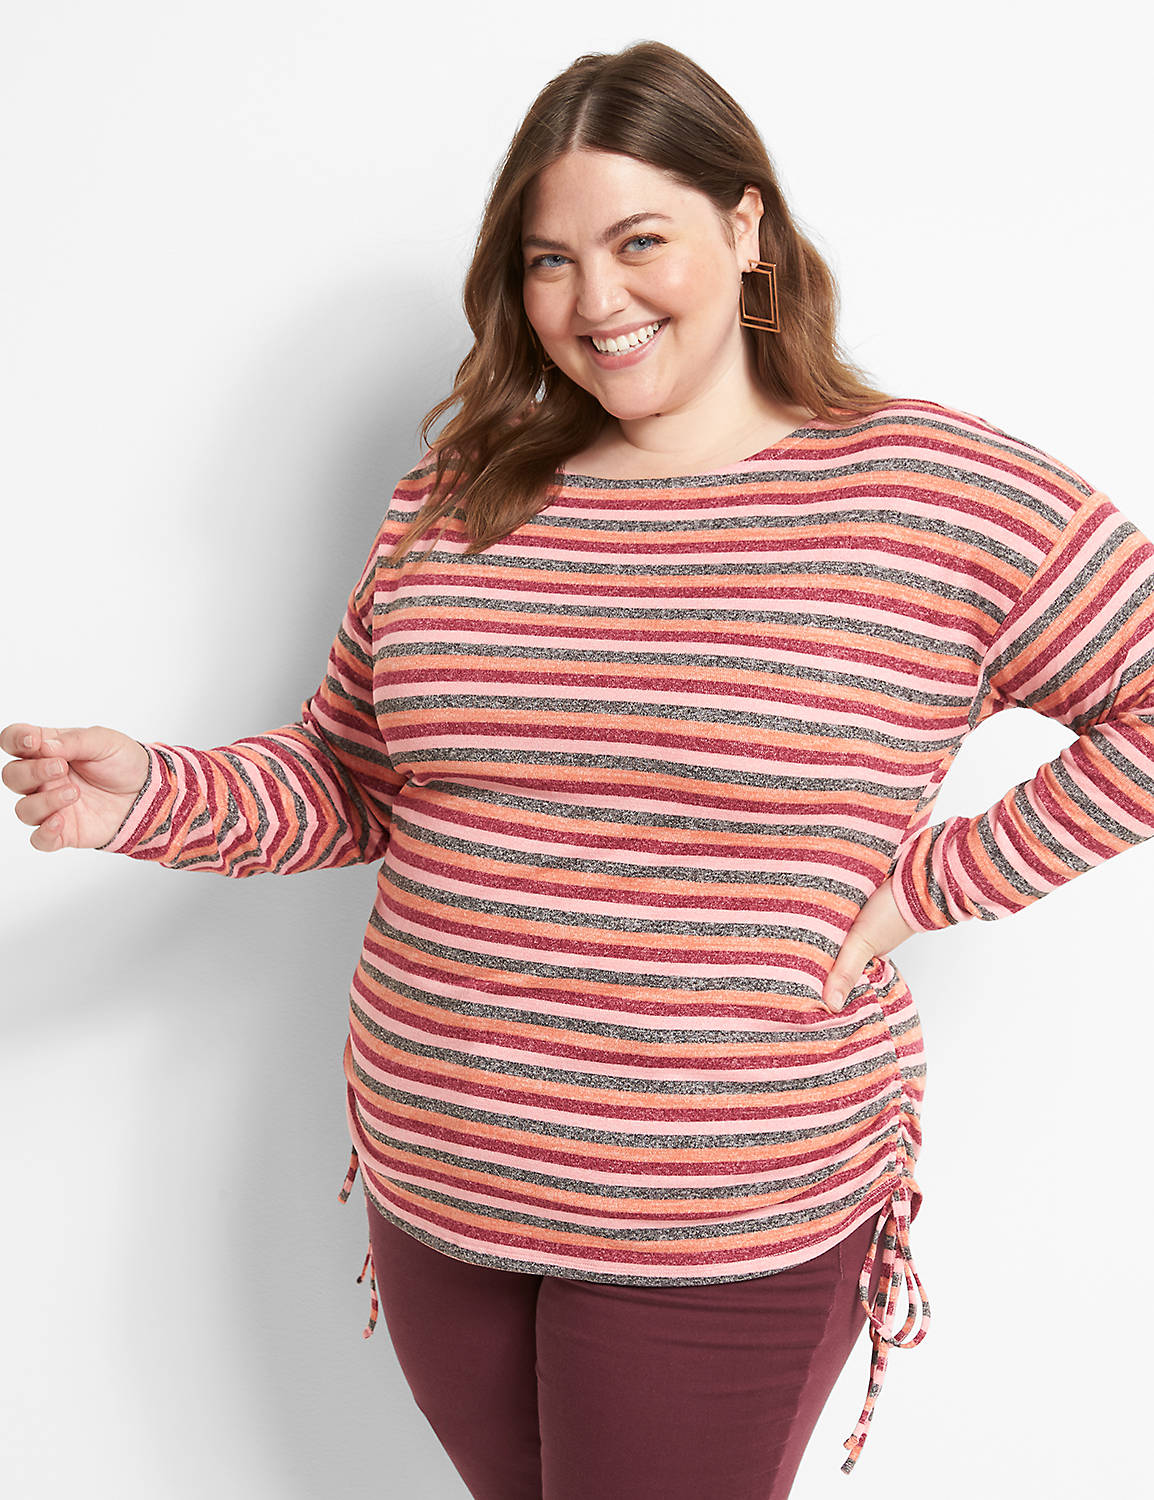 Long Sleeve Drop Shoulder Boatneck Tee With Side Drawcord And Hacci Stripe 1122625:Stripe:10/12 Product Image 1